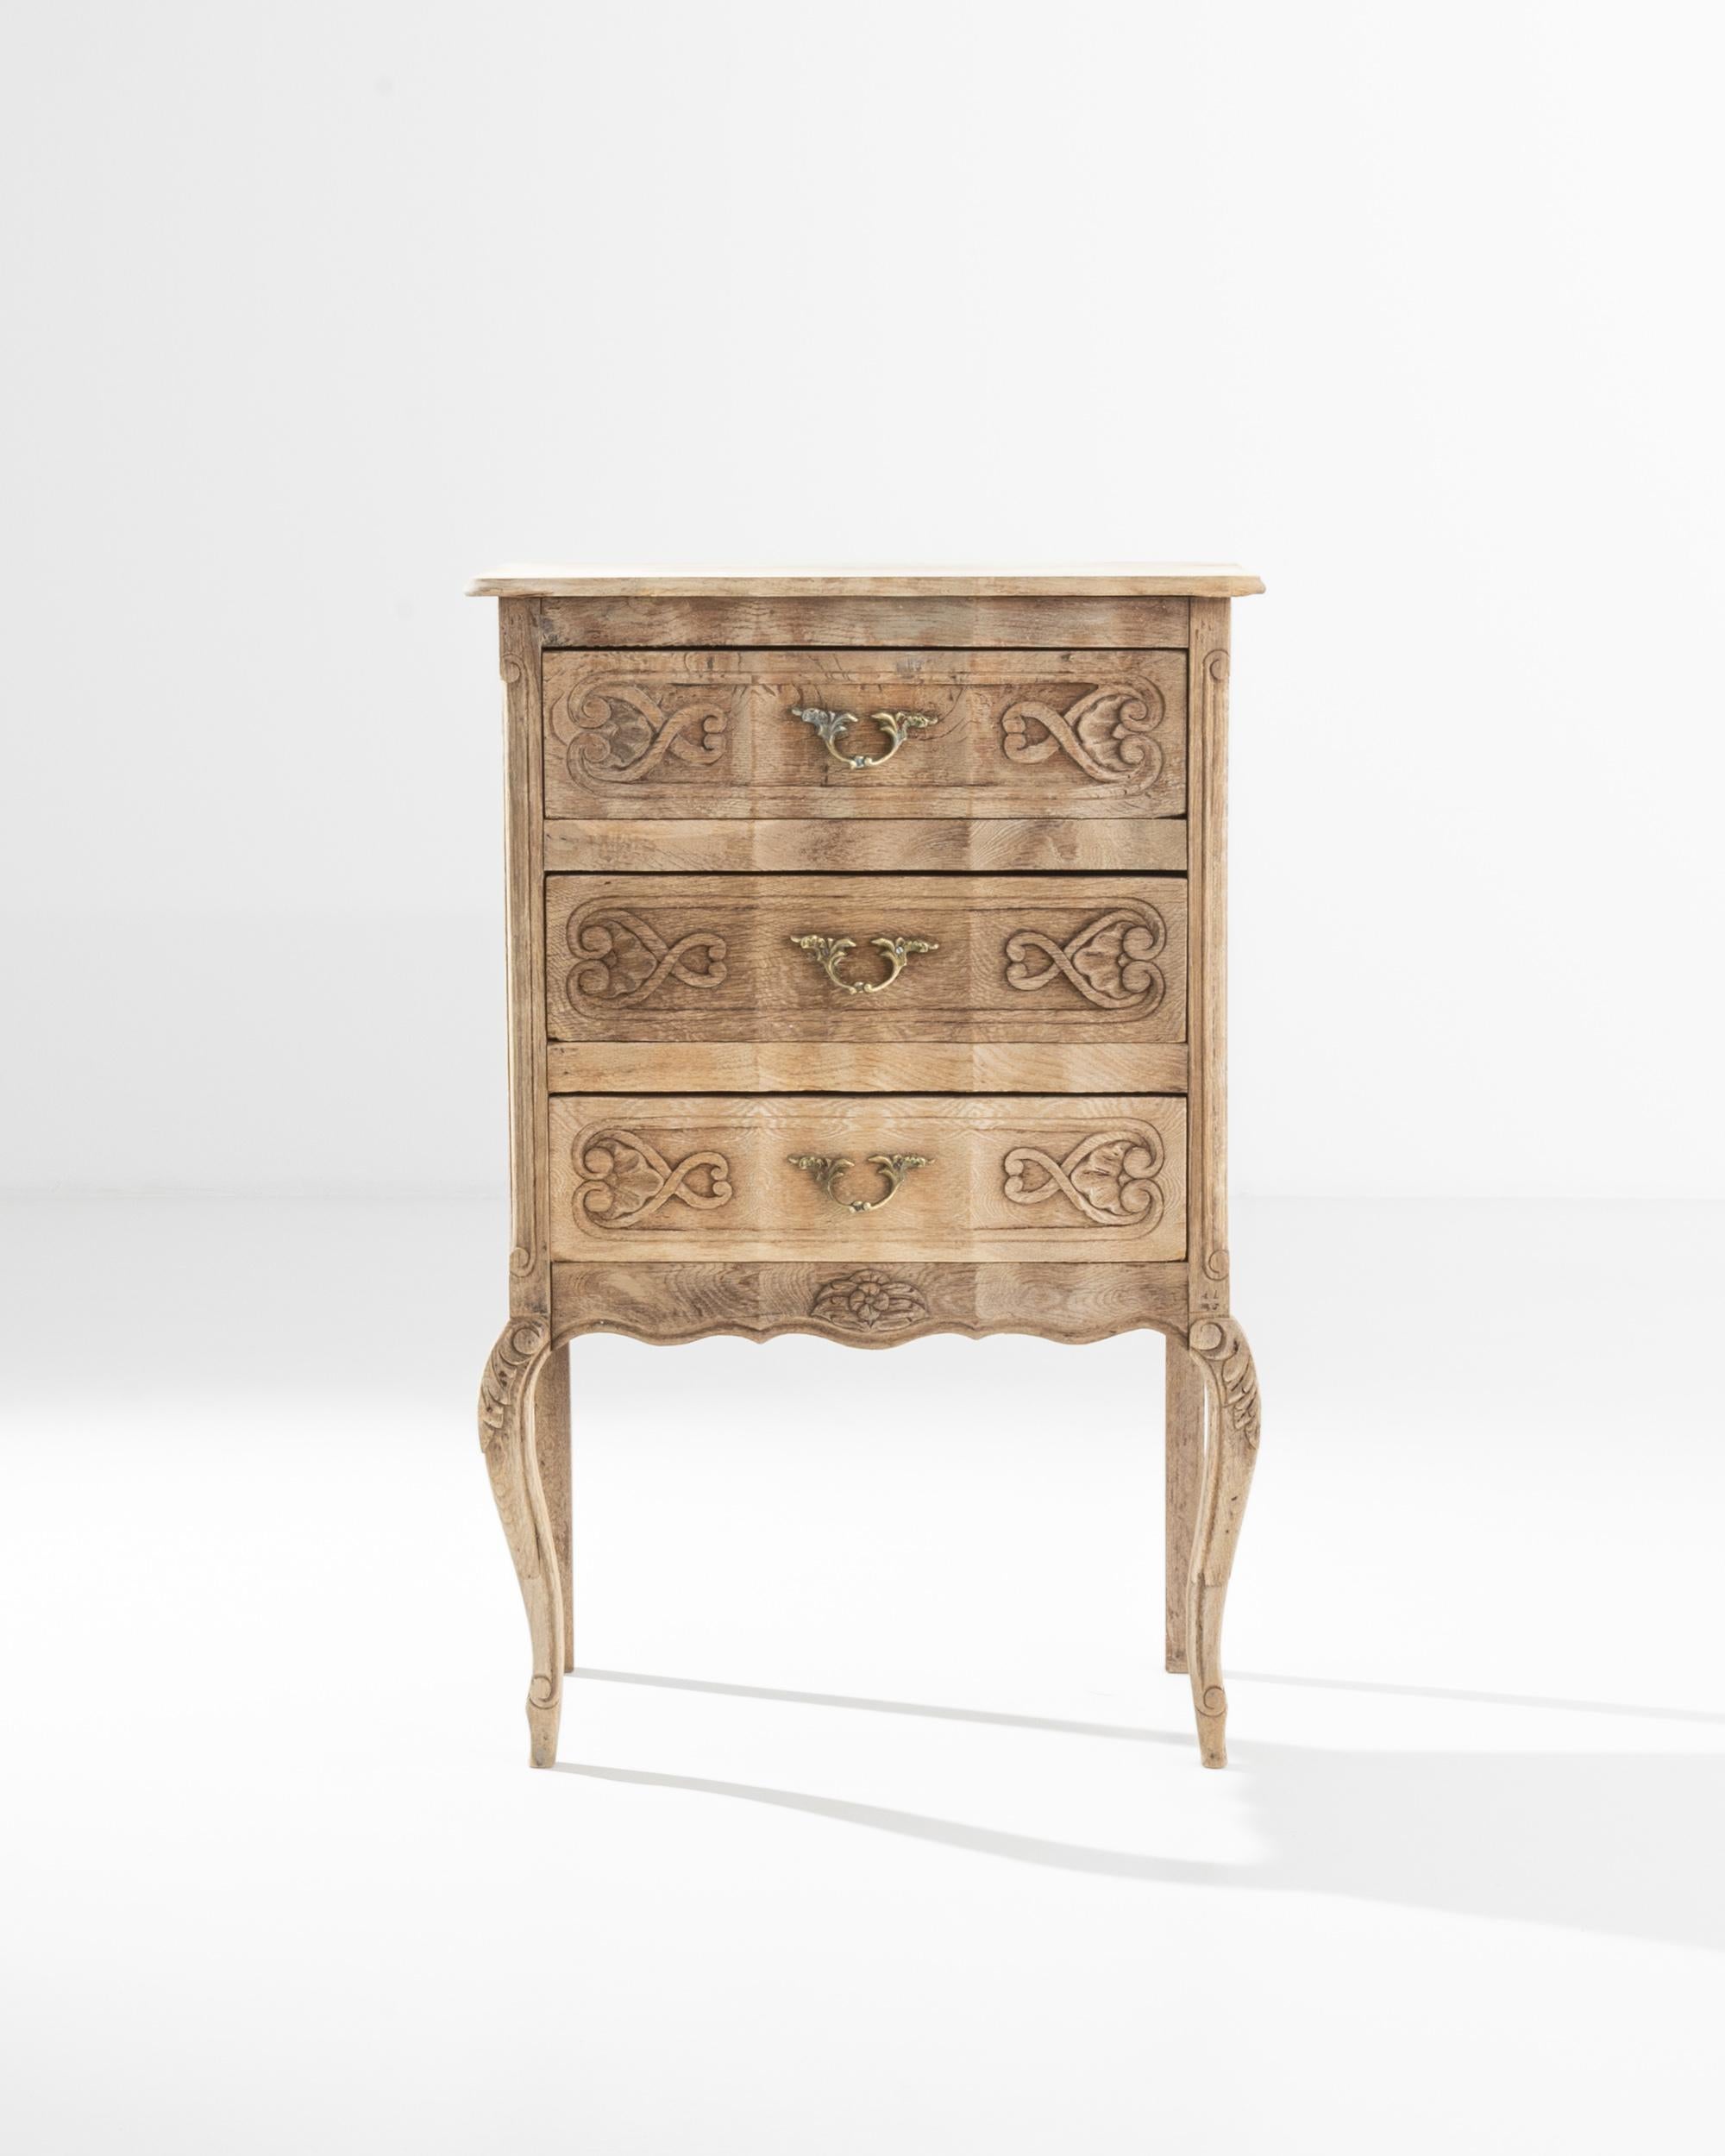 With a convenient small forn, this bleached oak chest of drawers made in France in the 20th century. Three top-down drawers are flanked by animated curved legs, giving a handsome shape to this set of drawers. Scroll and acanthus leaf motifs combine